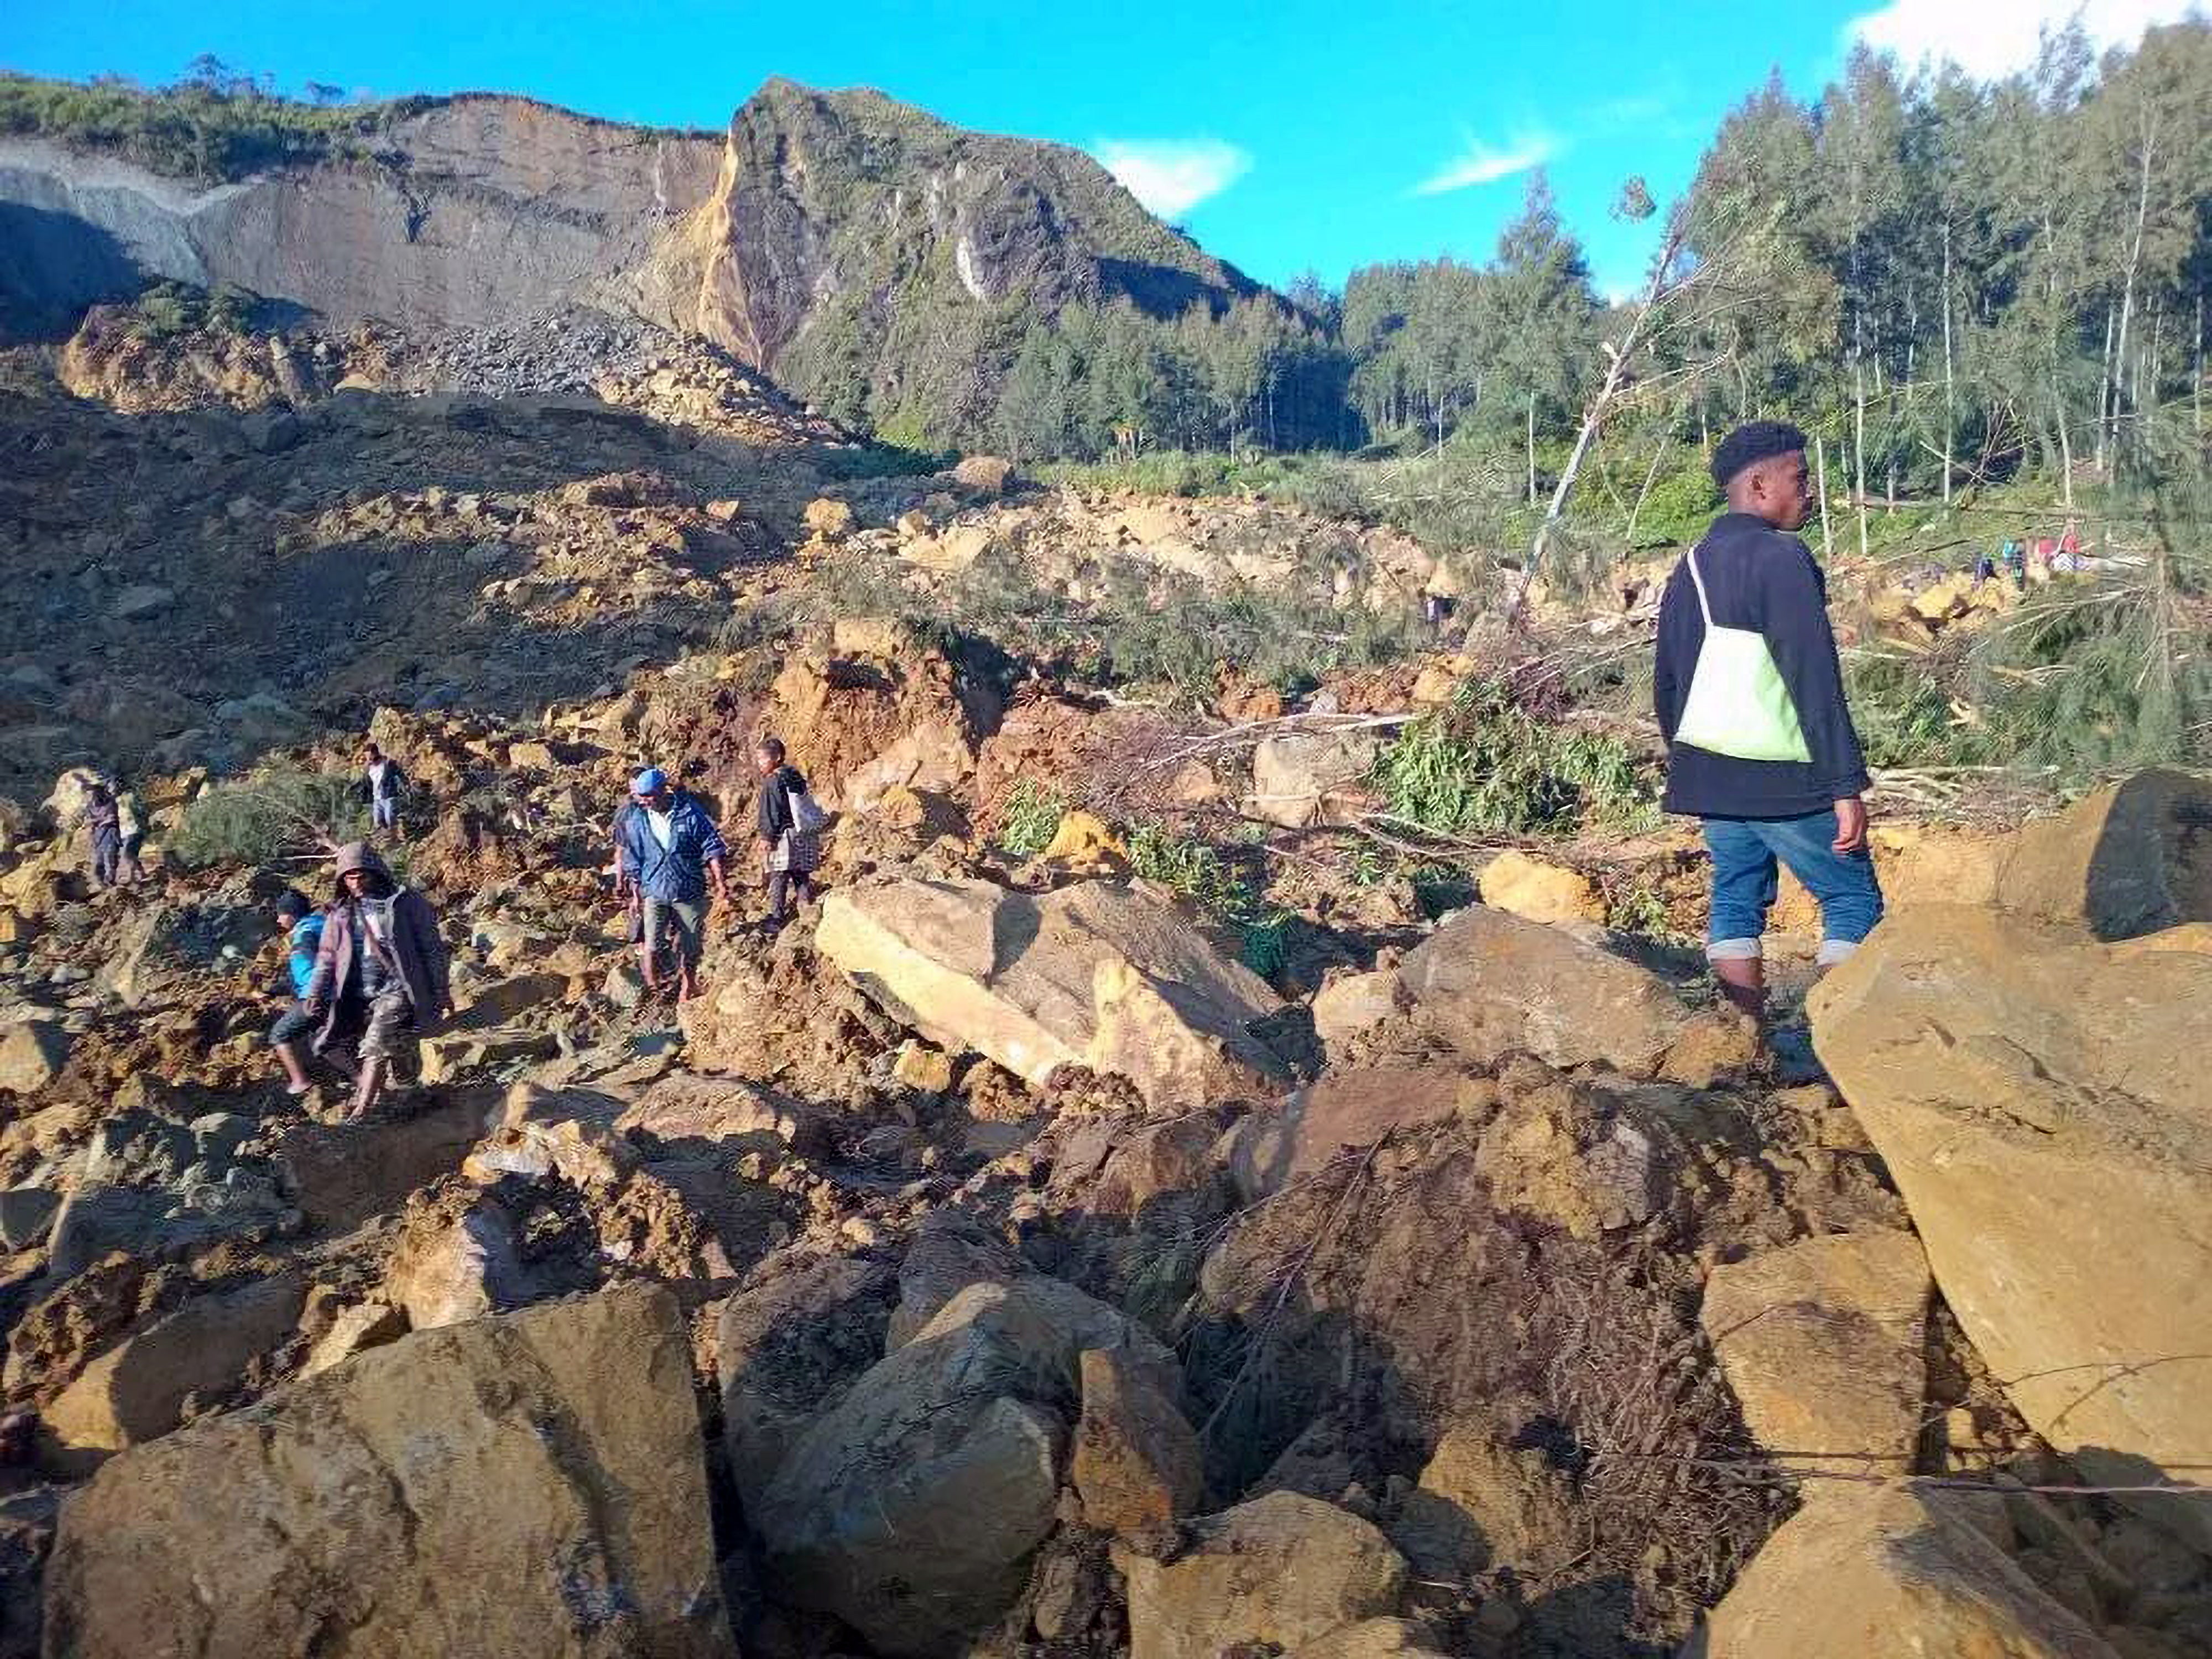 People walk with their belongings in the area where a landslide hit the village of Kaokalam, Enga province, Papua New Guinea